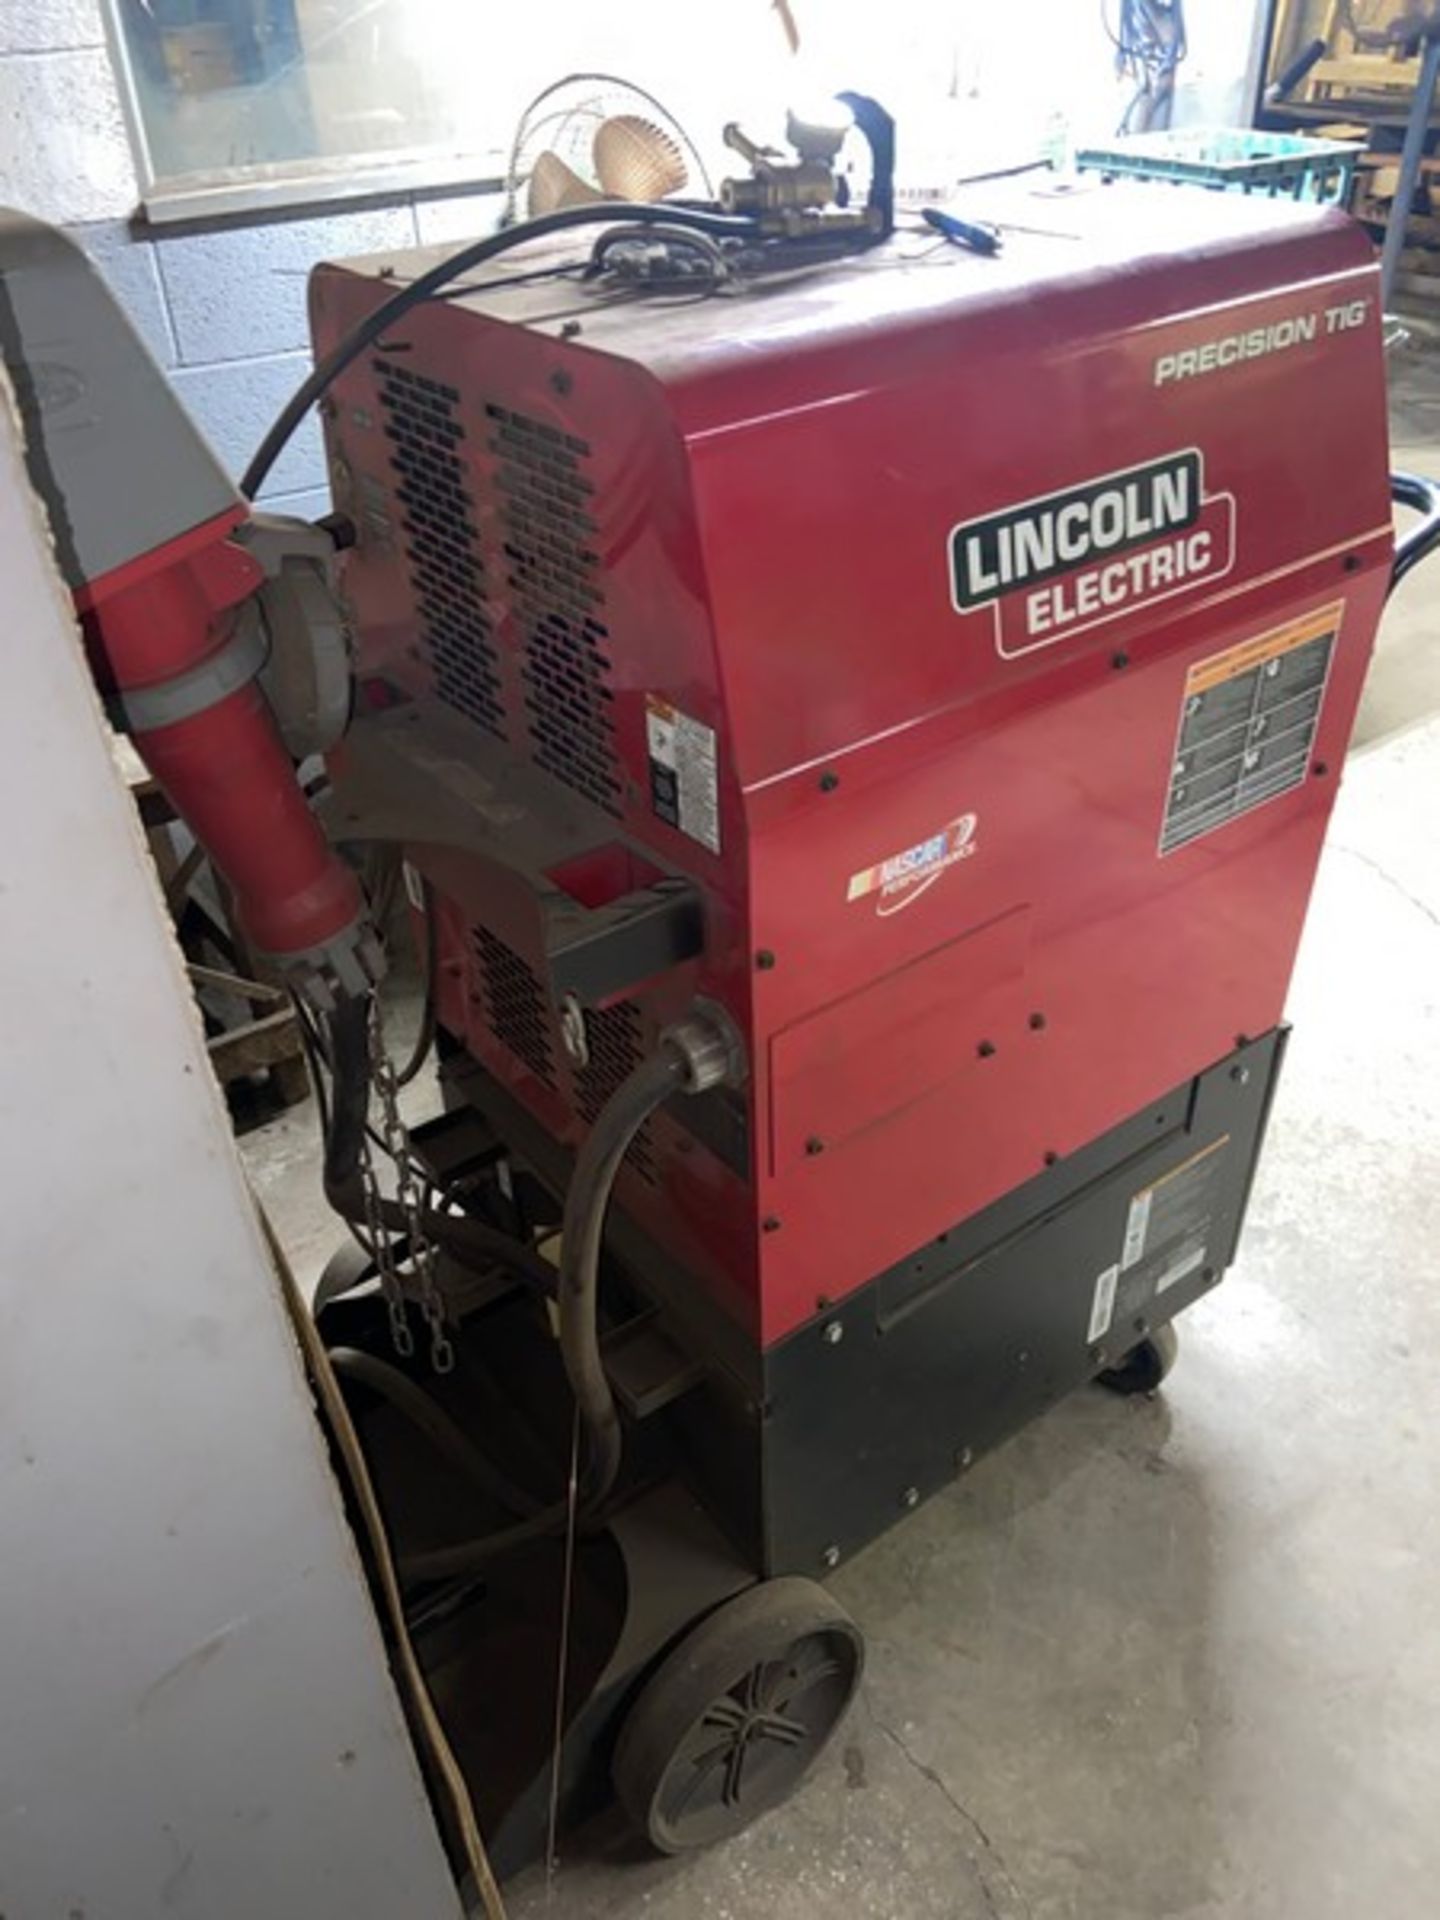 Lincoln Electric 375 Precision TIG Welder, S/N U1150204401, Mounted on Portable Frame - Image 5 of 6